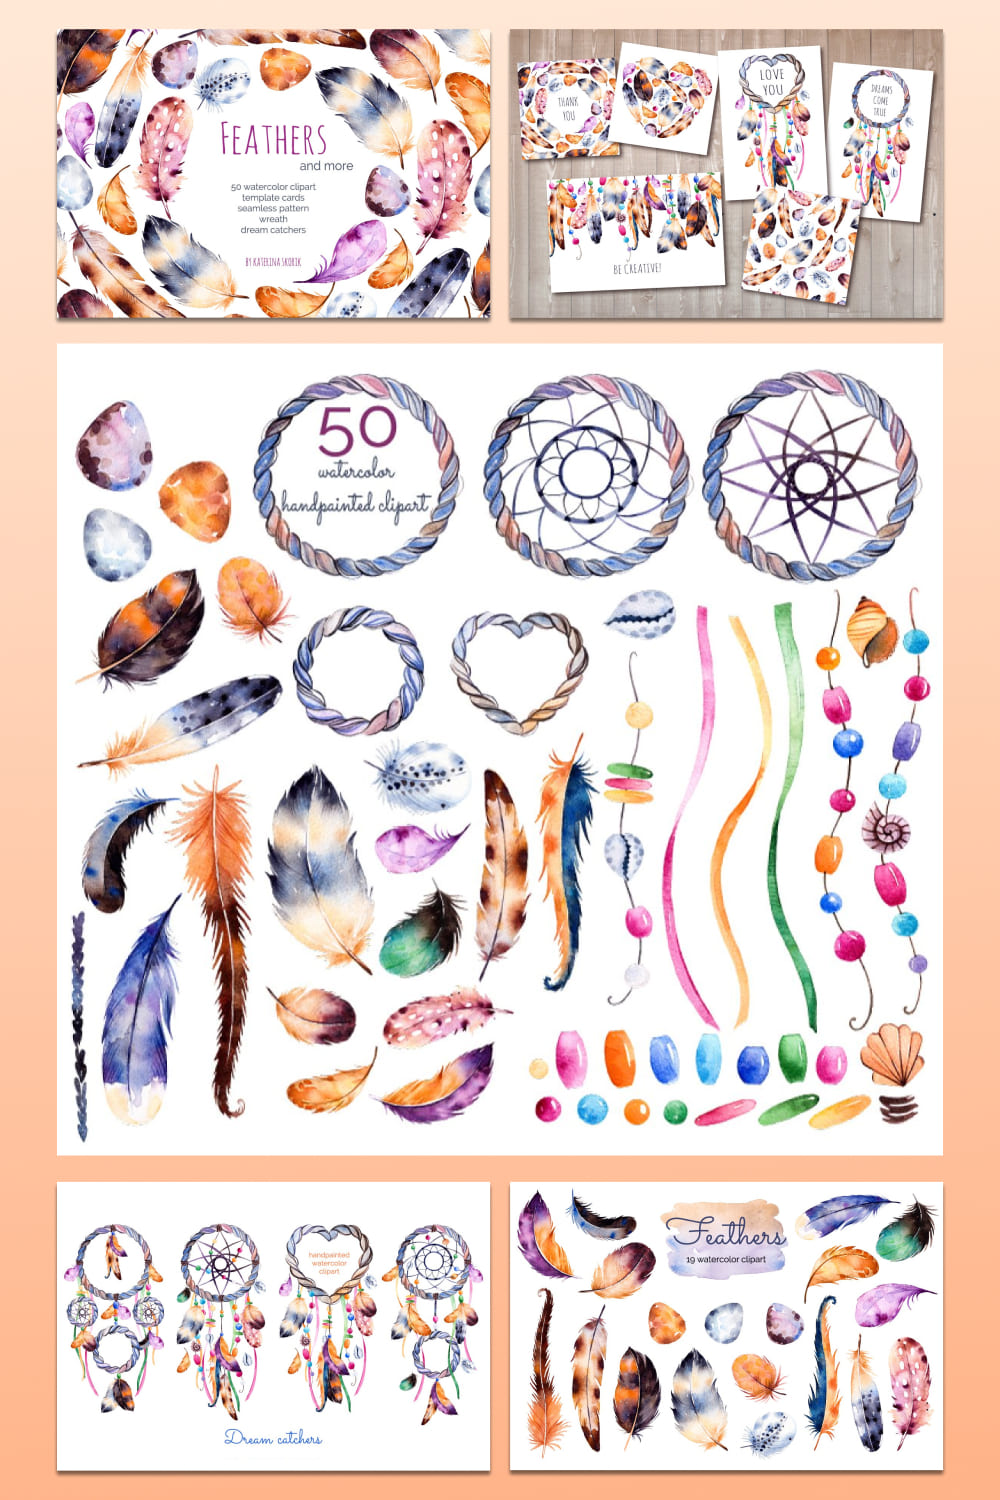 feathers and dream catchers graphics.